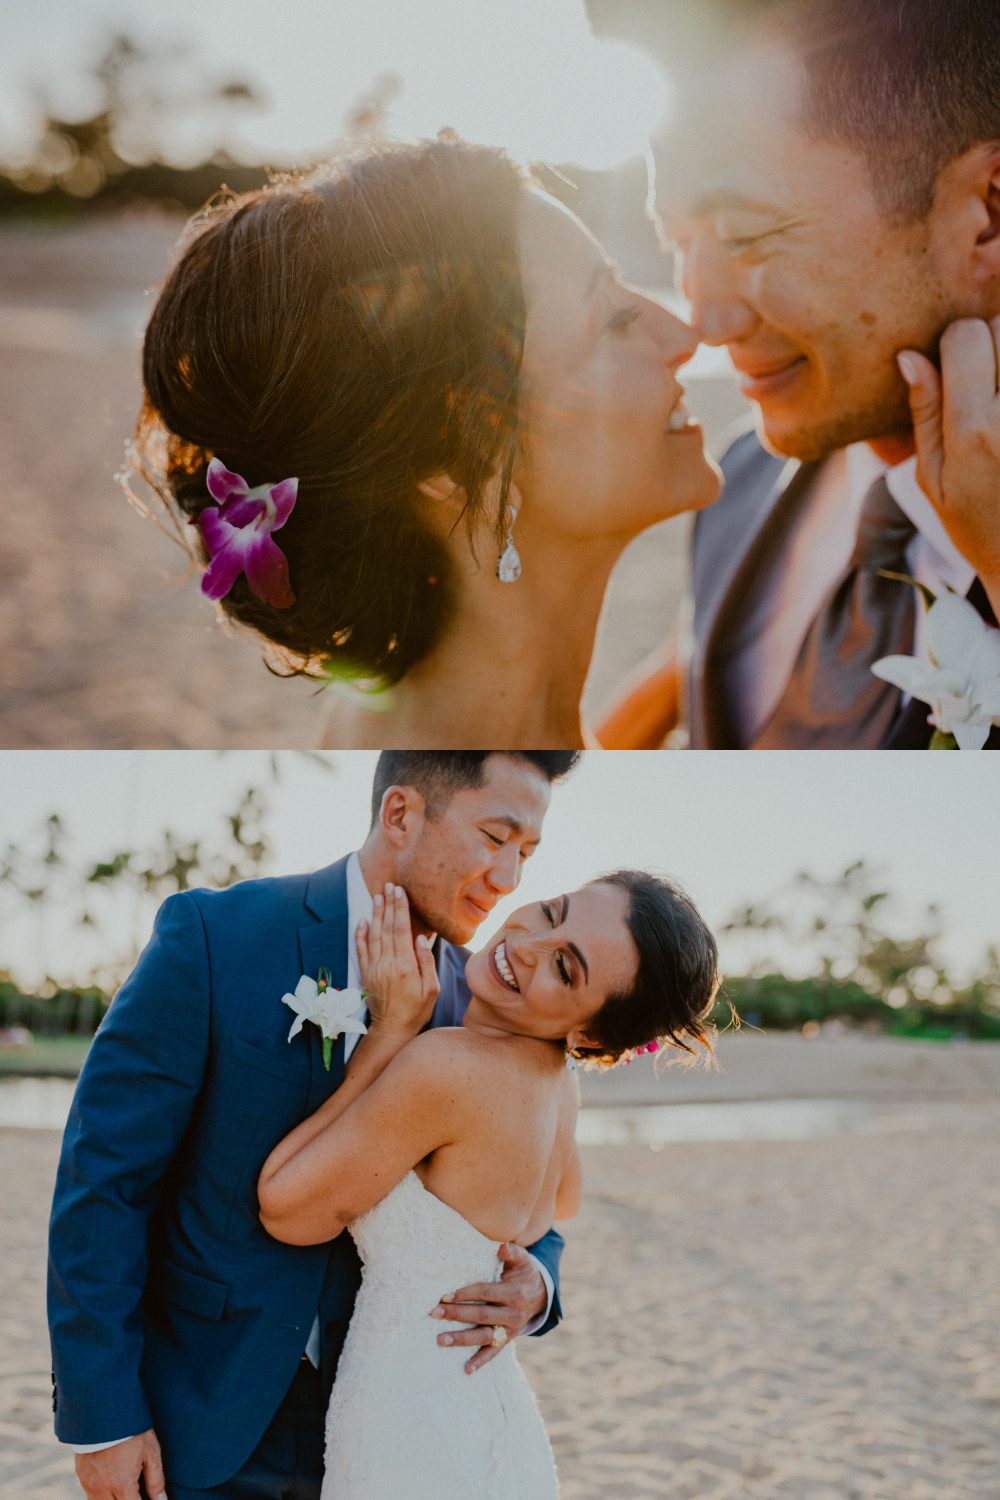 Bride and groom laugh at sunset as they hold each other close while laughing and playing on the beach after their Hawaii Wedding Ceremony | Oahu Wedding Photographer, Oahu Elopement Photographer, Destination Wedding Photographer, Destination Elopement Photographer, Newlywed moments ideas, Newlywed Photography inspiration, Hawaii Elopement ideas | chelseaabril.com